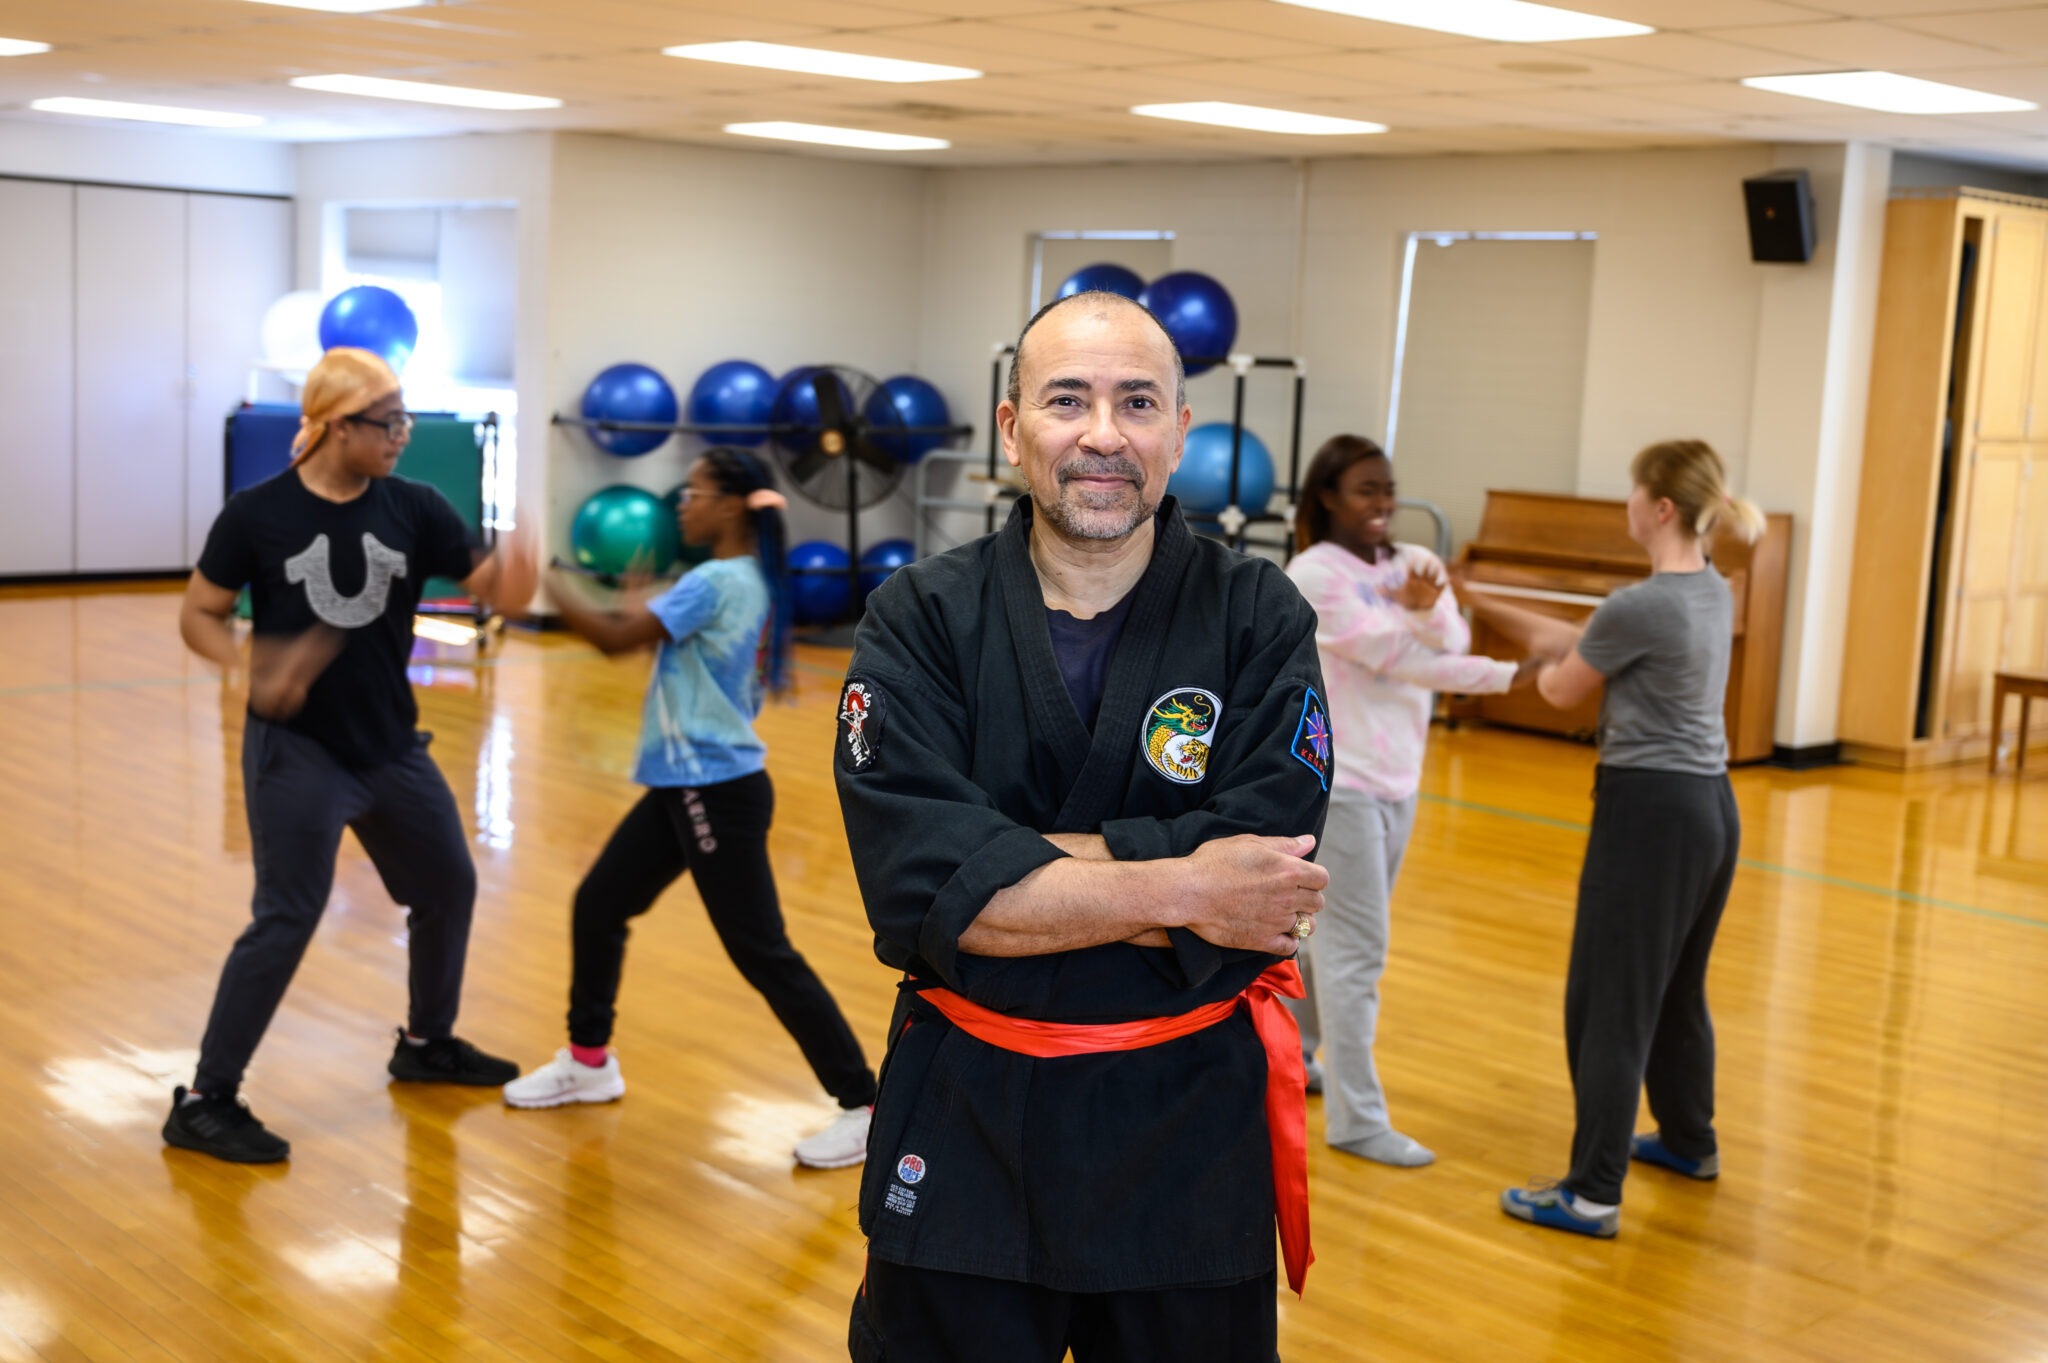 Dr. Jose Pimienta-Bey posing in front of his martial arts club in the dance studio of Seabury.